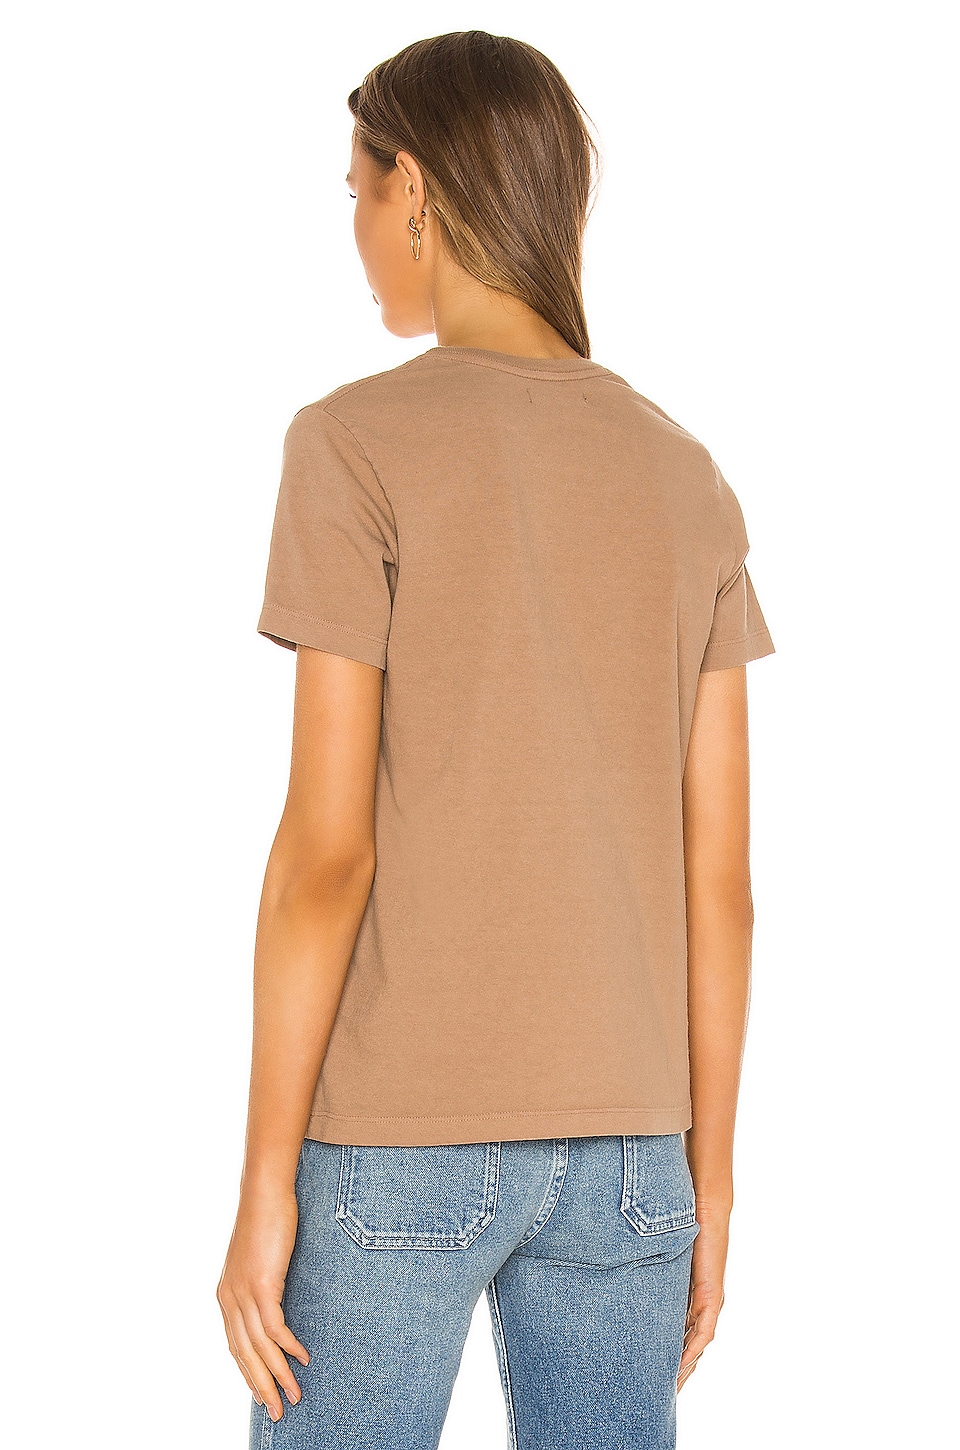 Citizens of Humanity Frankie Classic T Shirt in Toast | REVOLVE